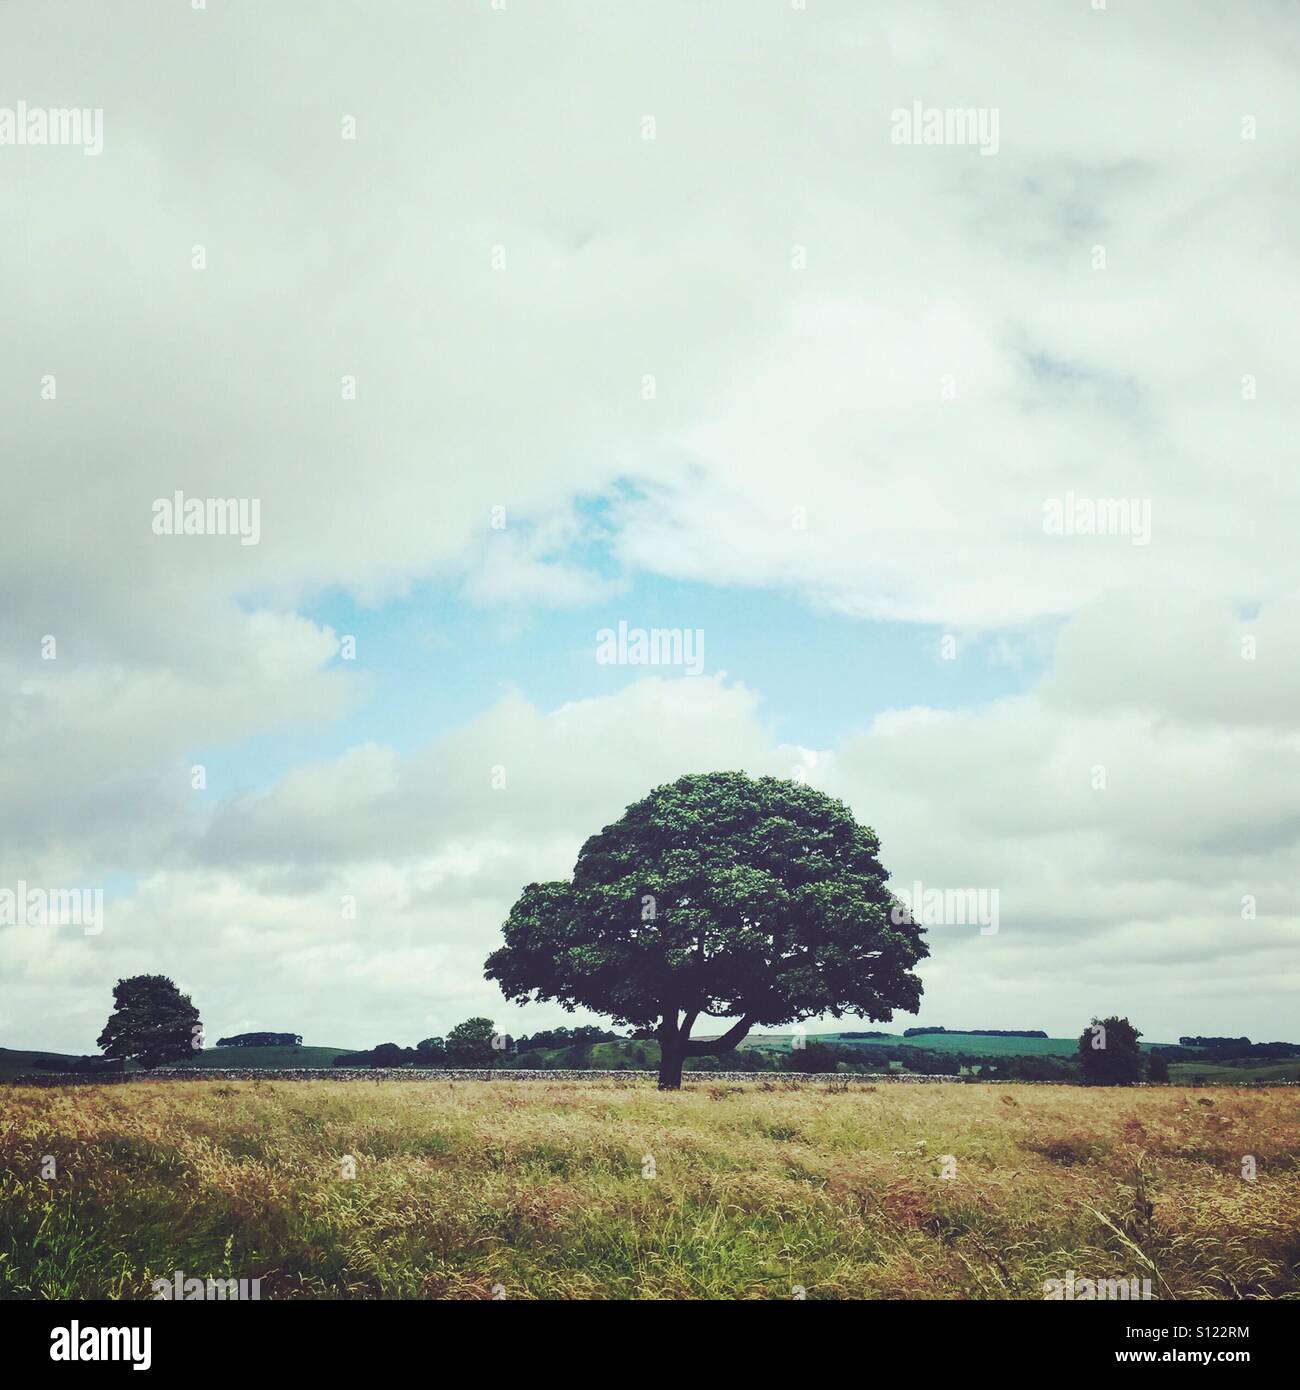 A tree in the middle of a field in Alstonefield, Peak District, Derbyshire Stock Photo